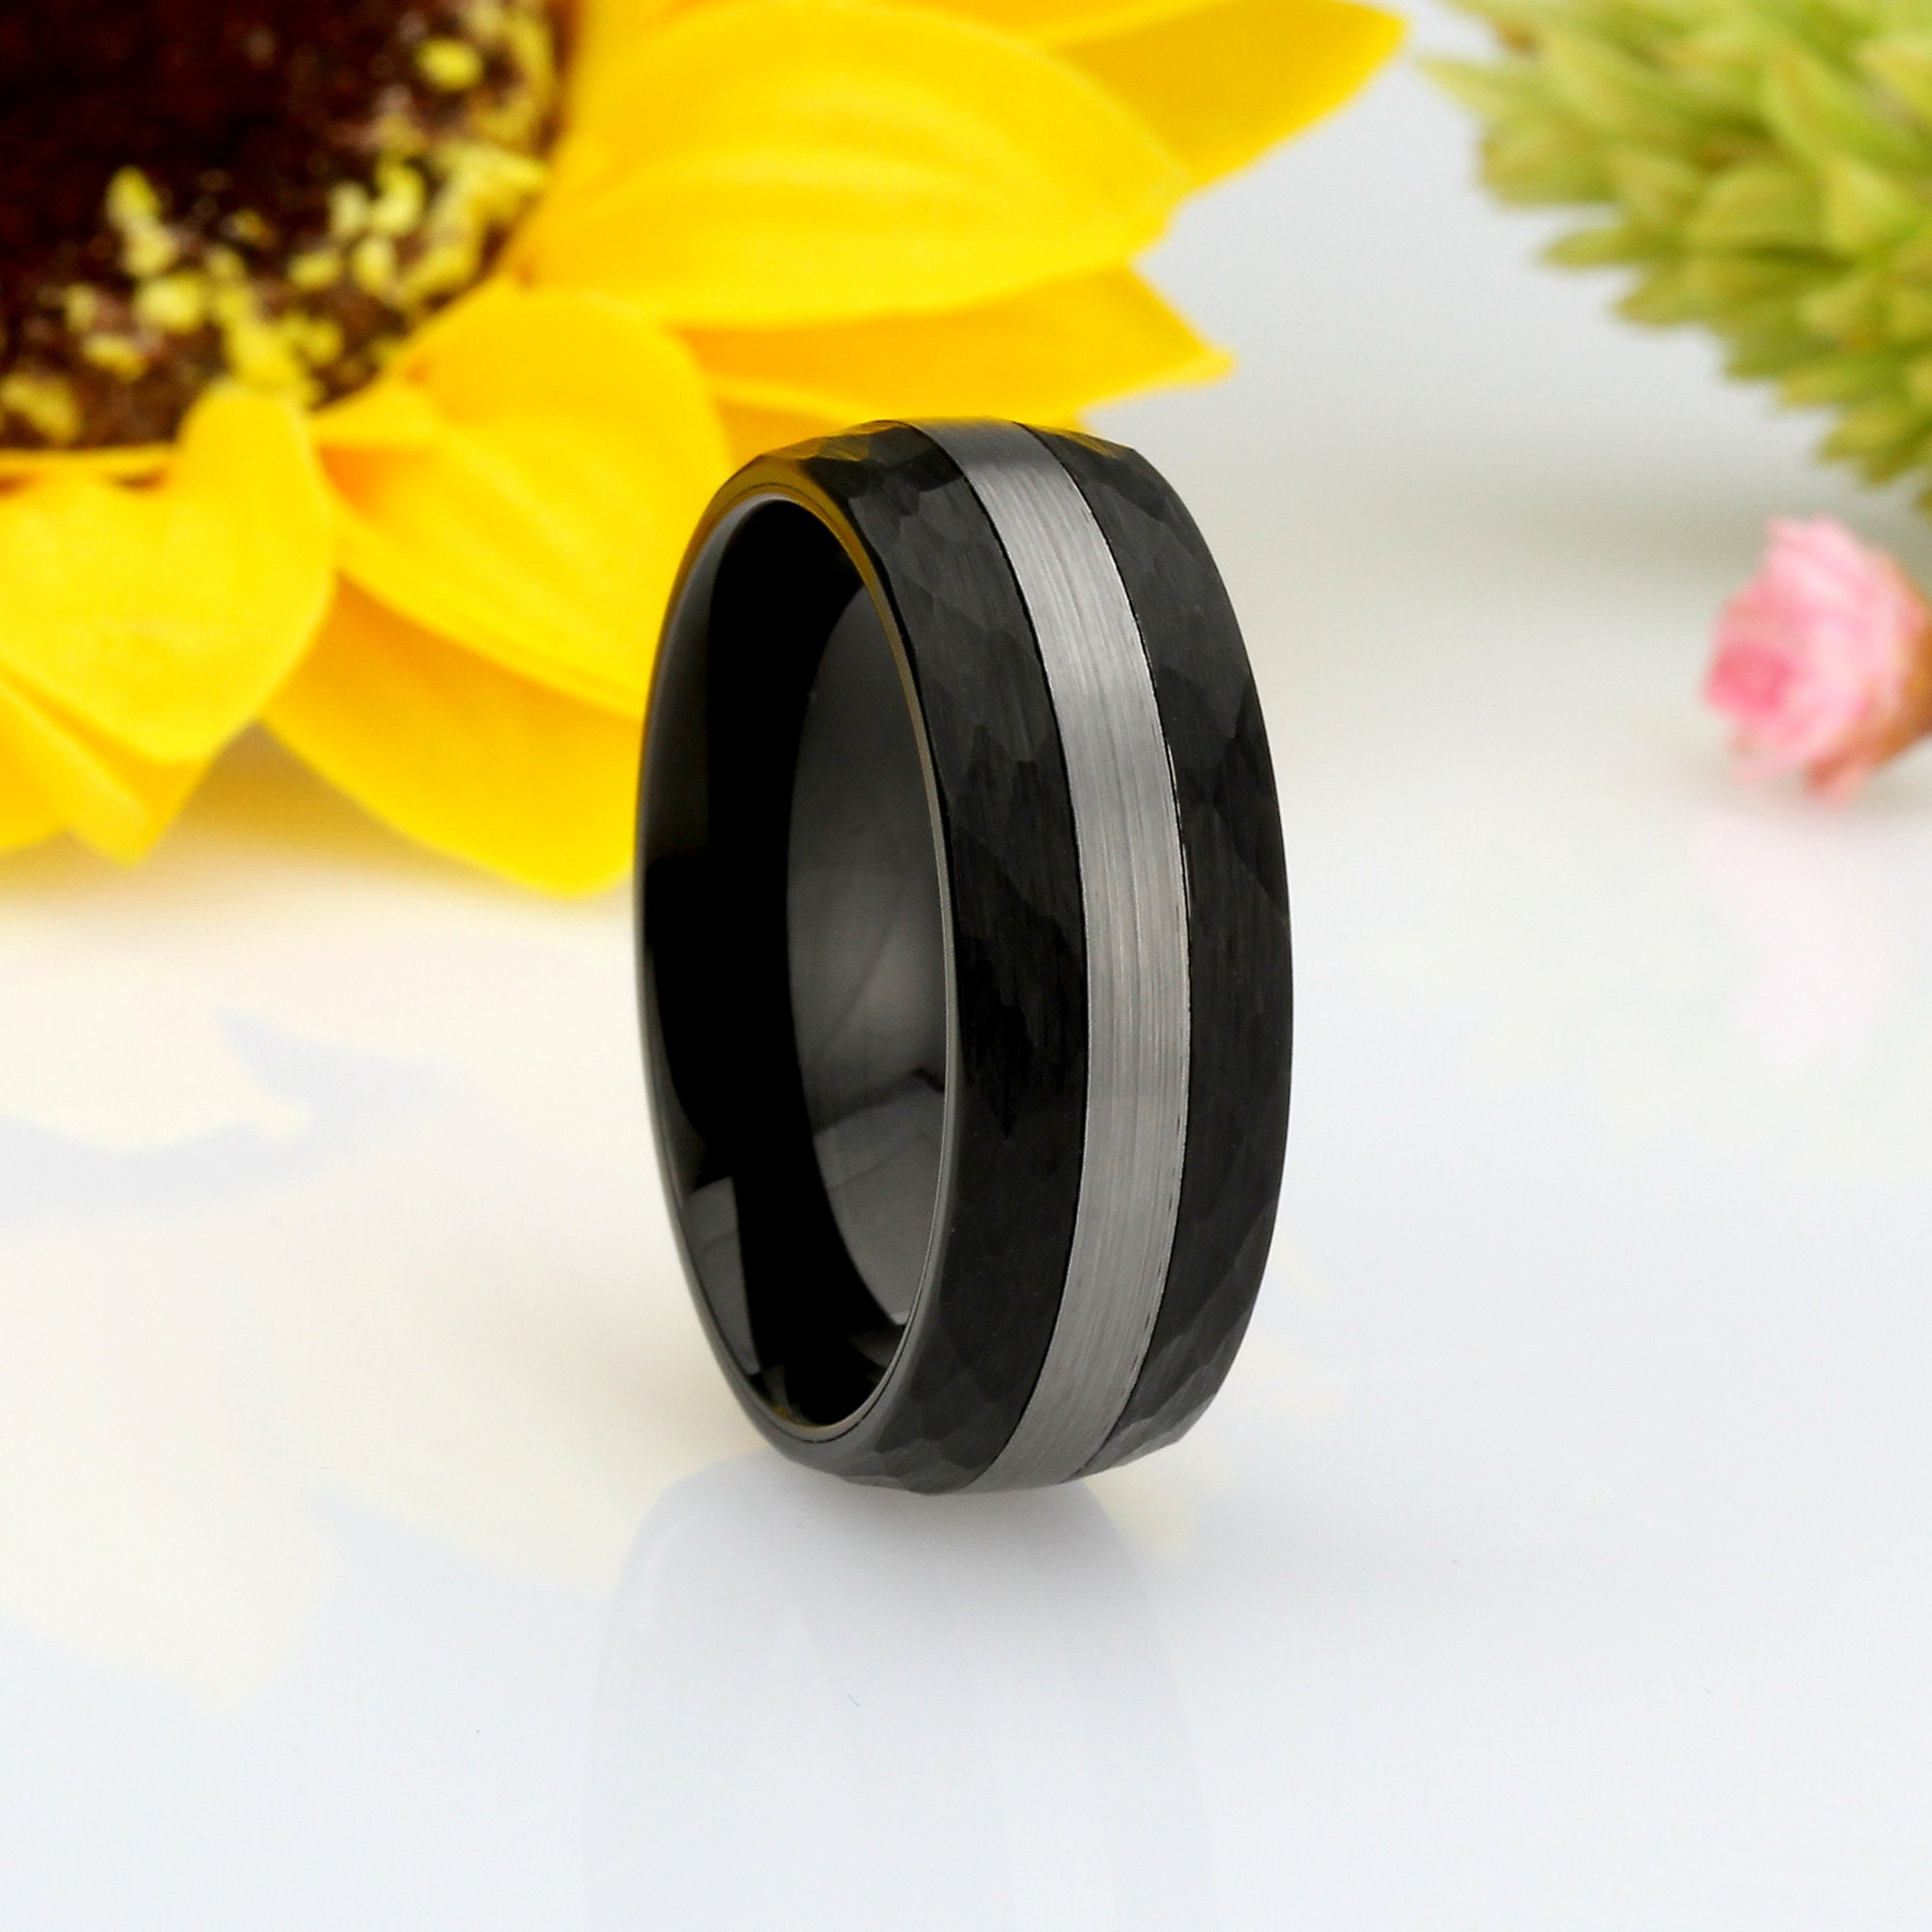 Best Quality Free Gift Box Titanium 8mm Black Ip-plated & Striped Polished Band